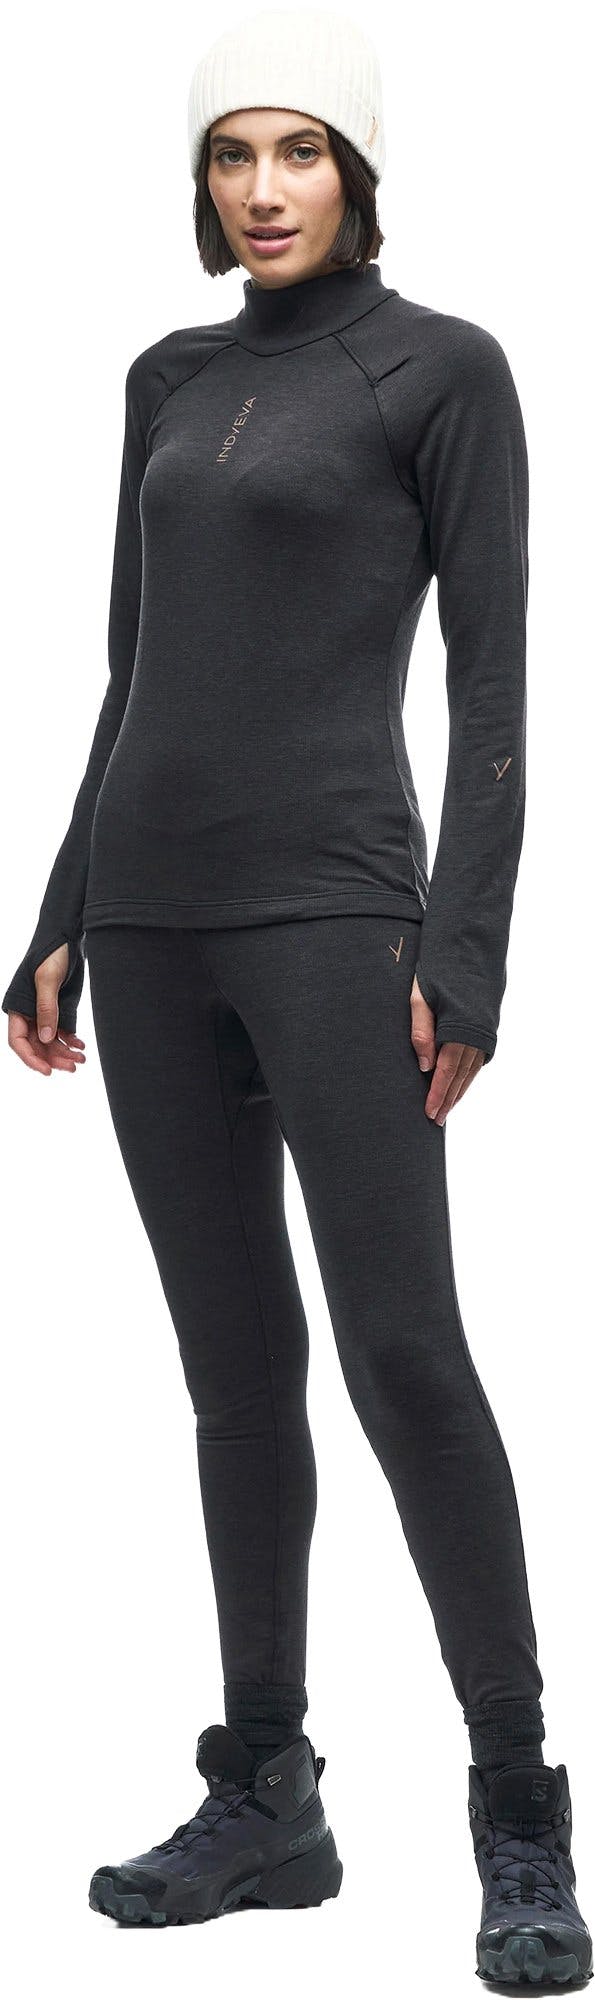 Product image for Livello Long Sleeve Sweater - Women's